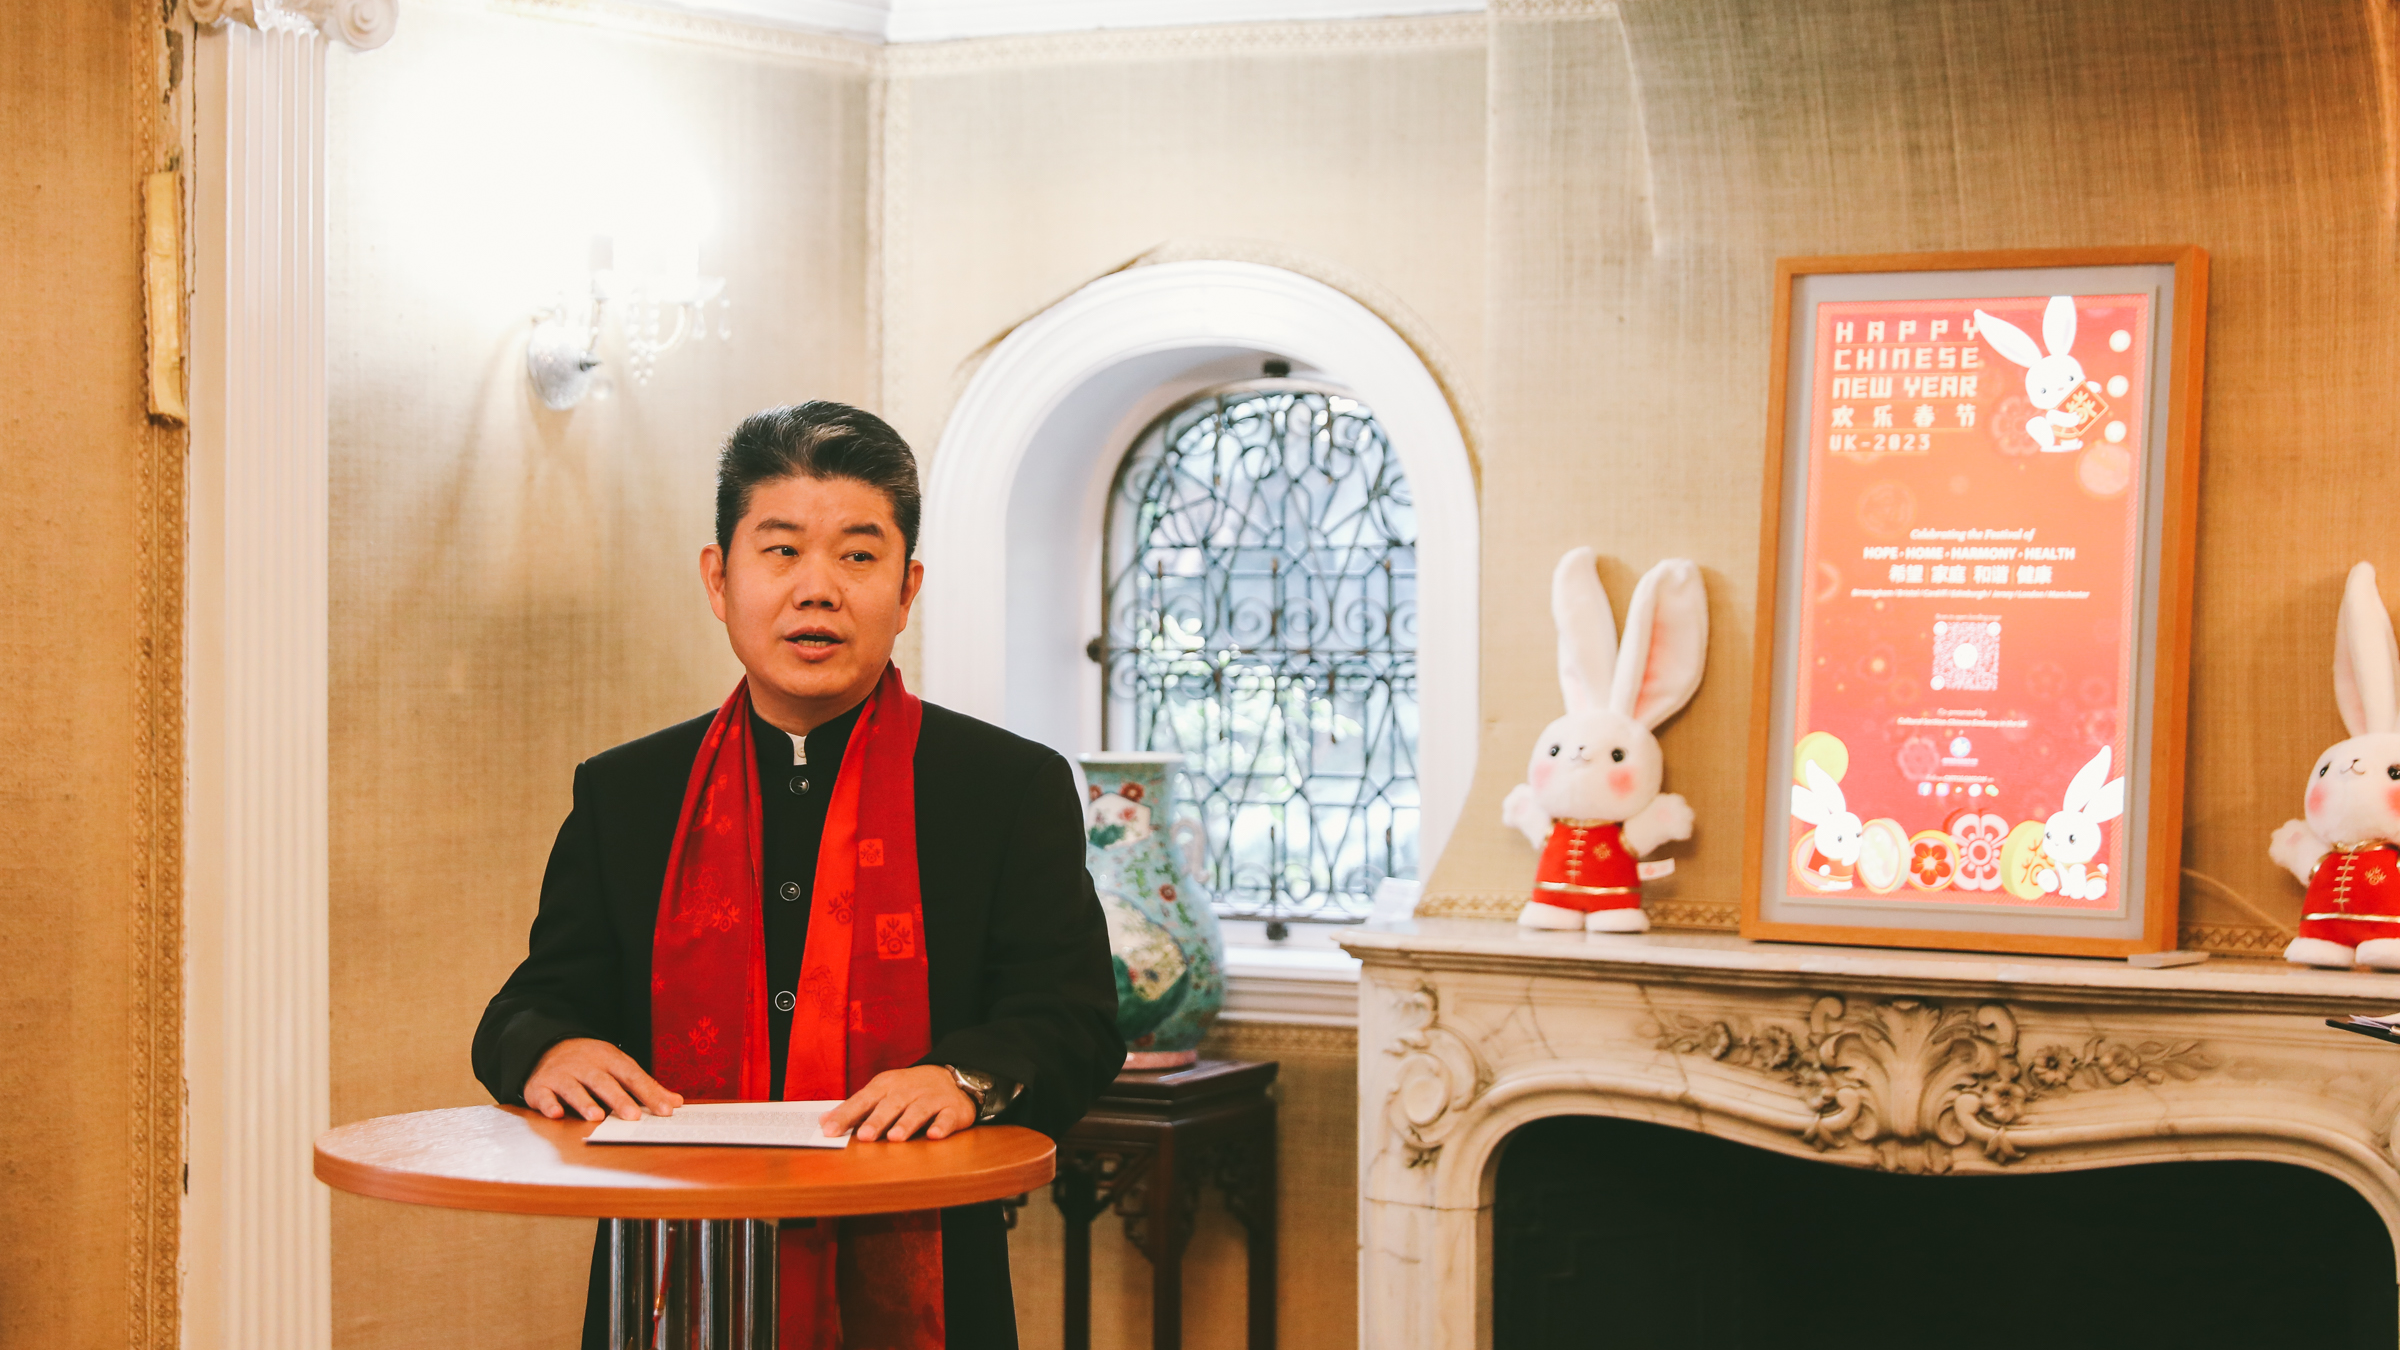 Li Liyan, Minister Counsellor of the Cultural Section at the launch of the Chinese New Year festivities. /Cultural Section of the Chinese Embassy in London.